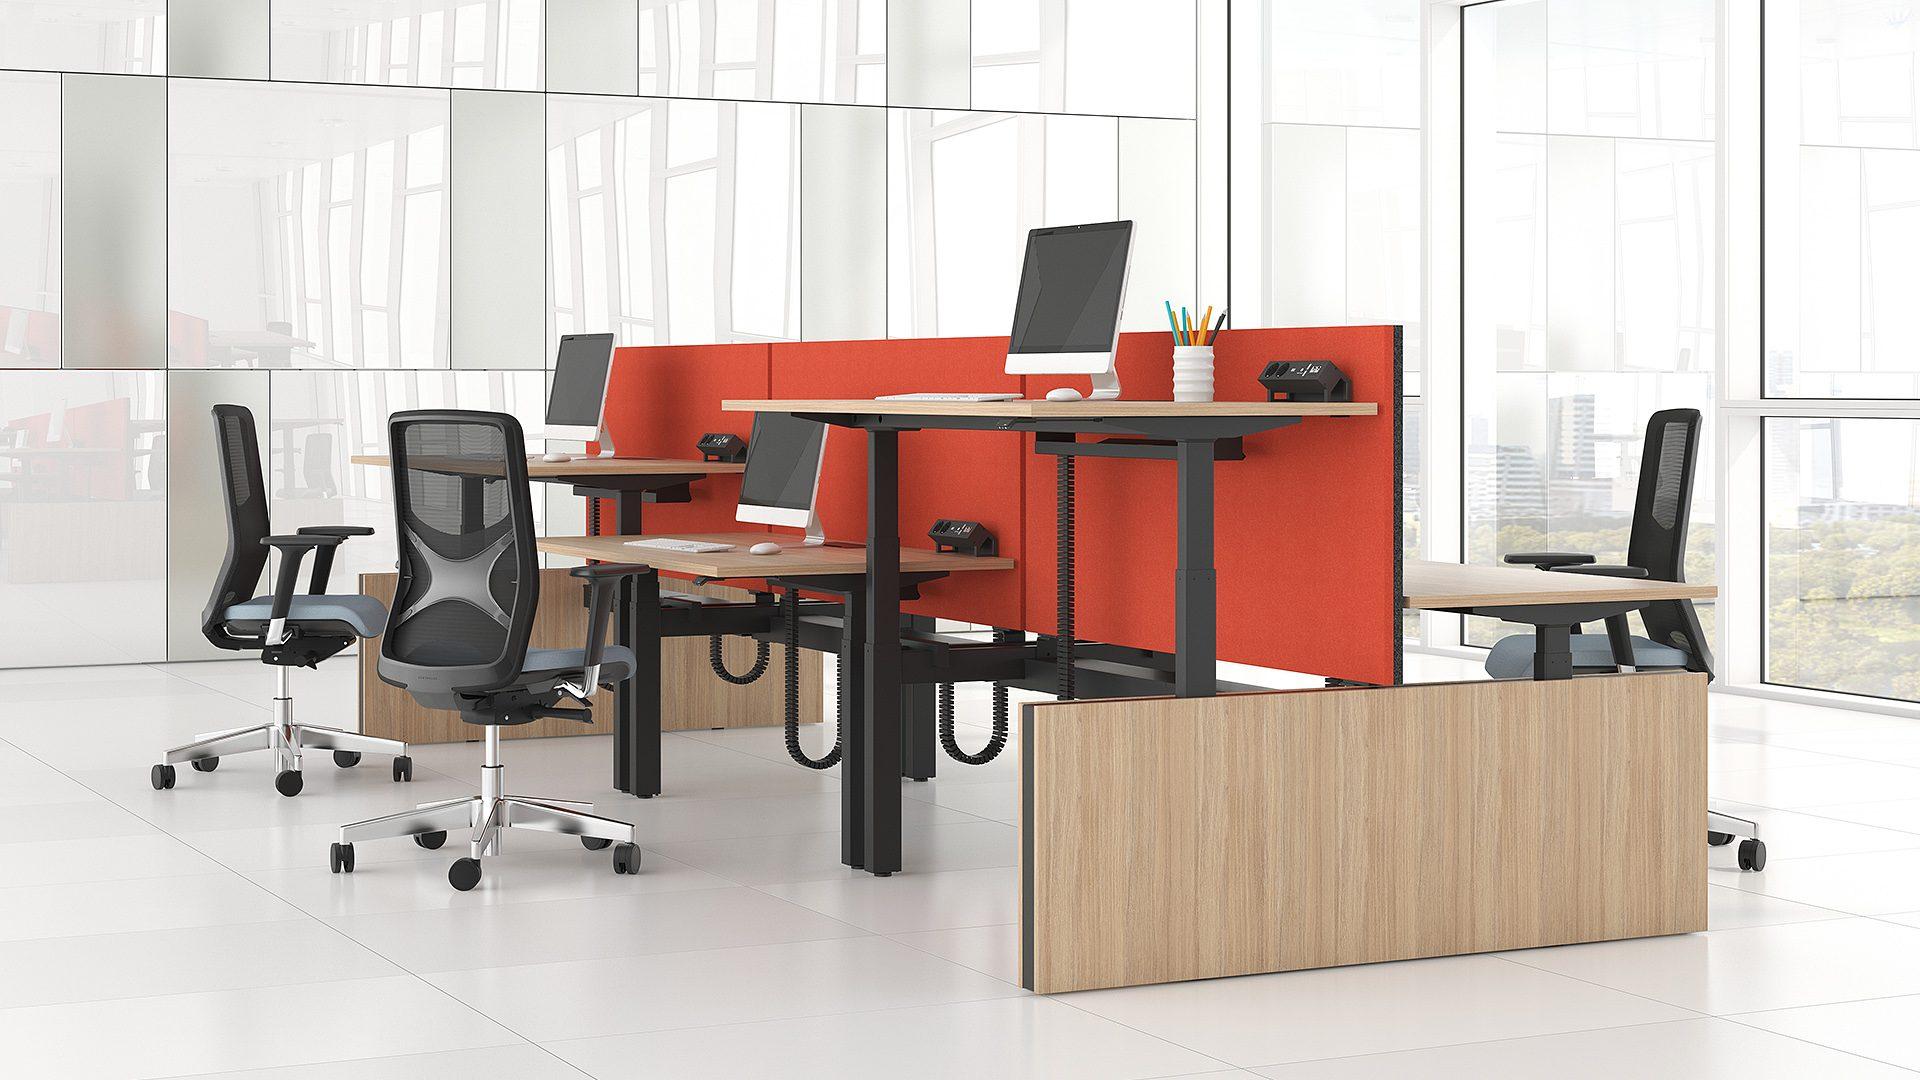 Modus desk divider screens in grey and red on Motion bench desk